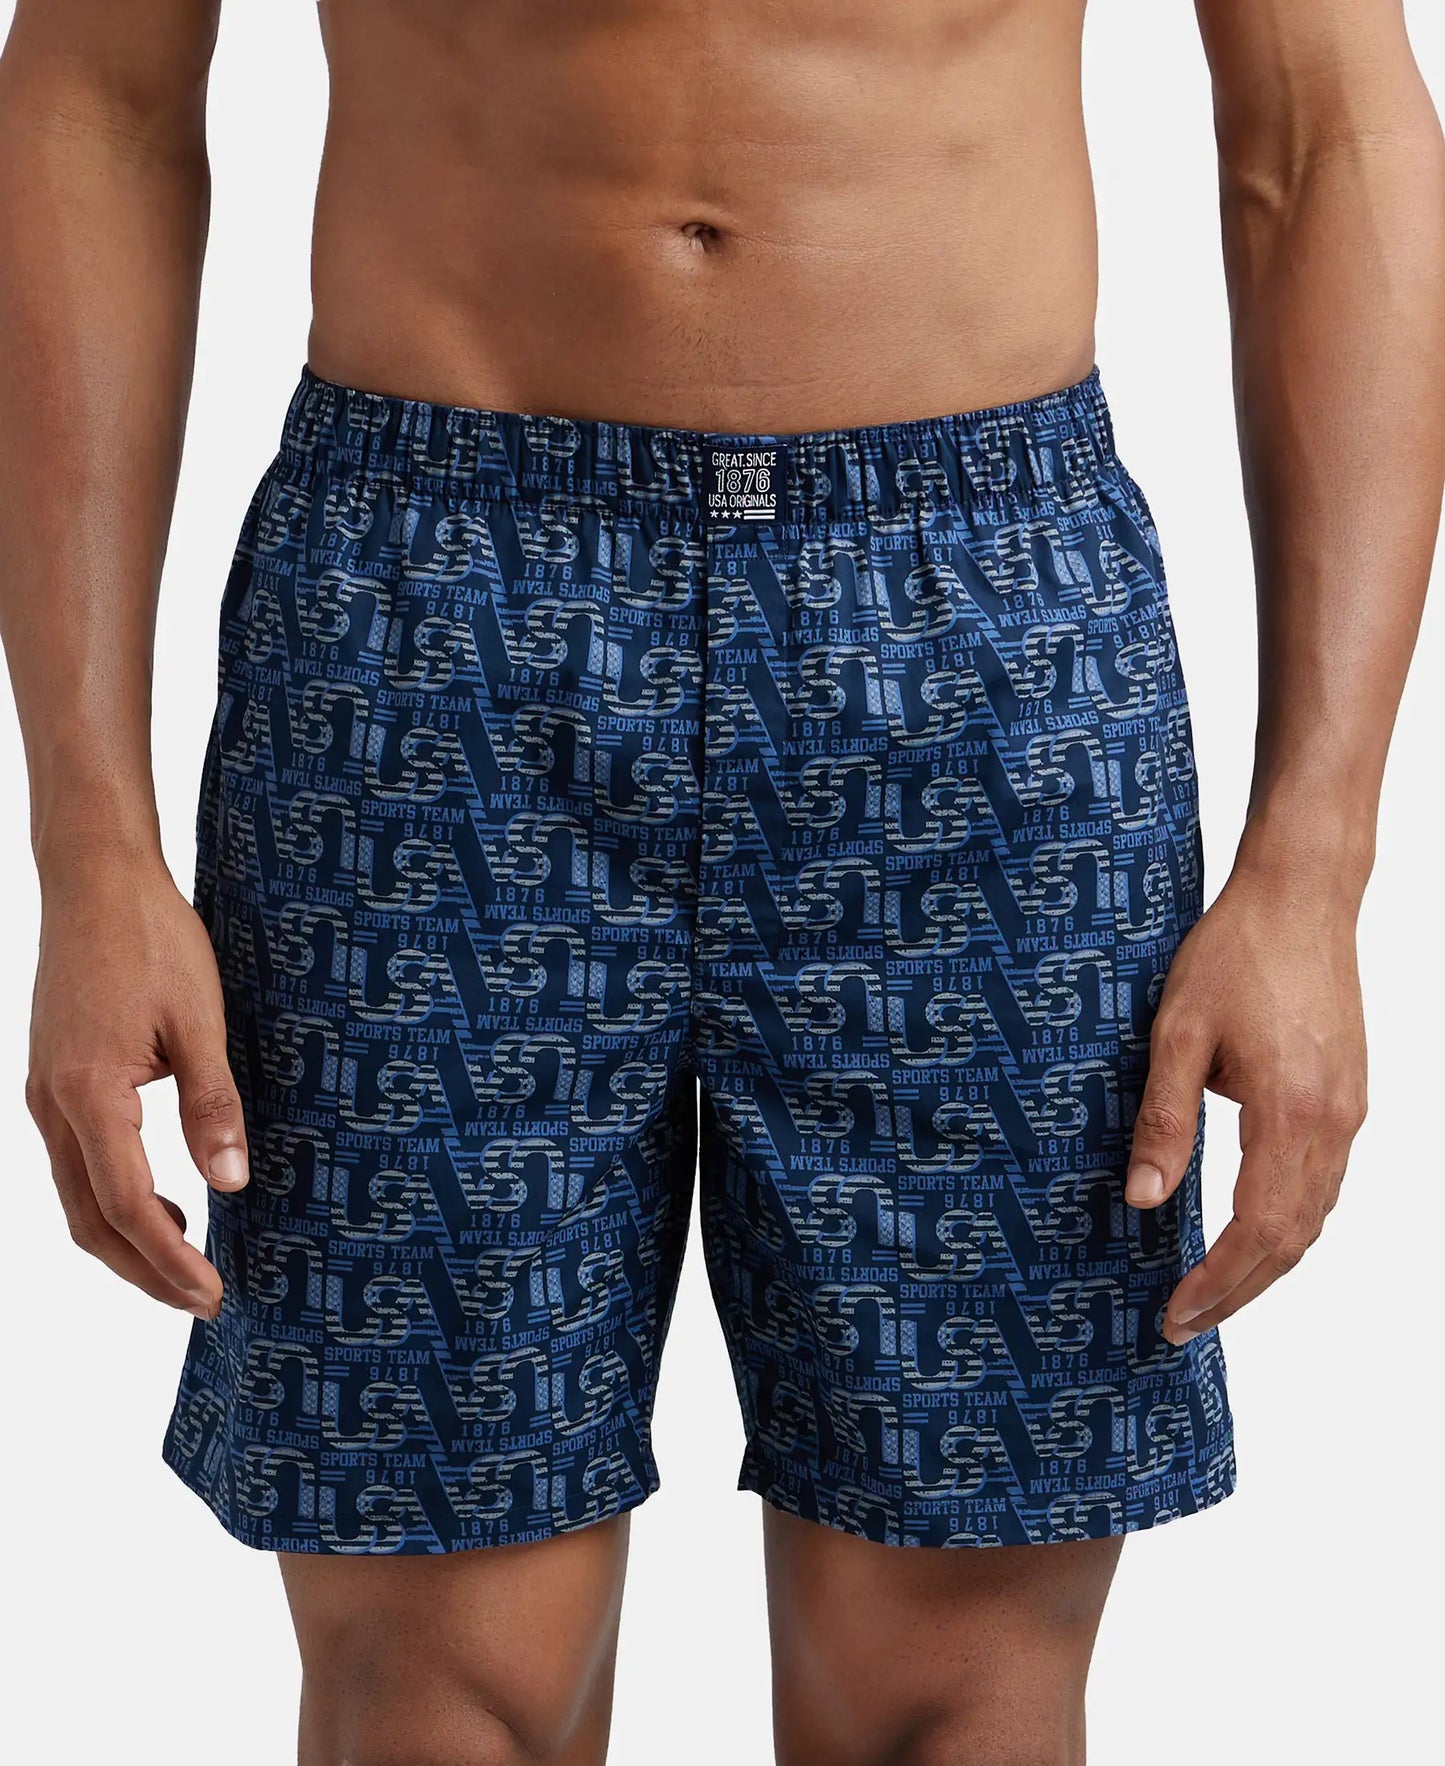 Super Combed Mercerized Cotton Woven Printed Boxer Shorts with Side Pocket - Navy Seaport Teal-3